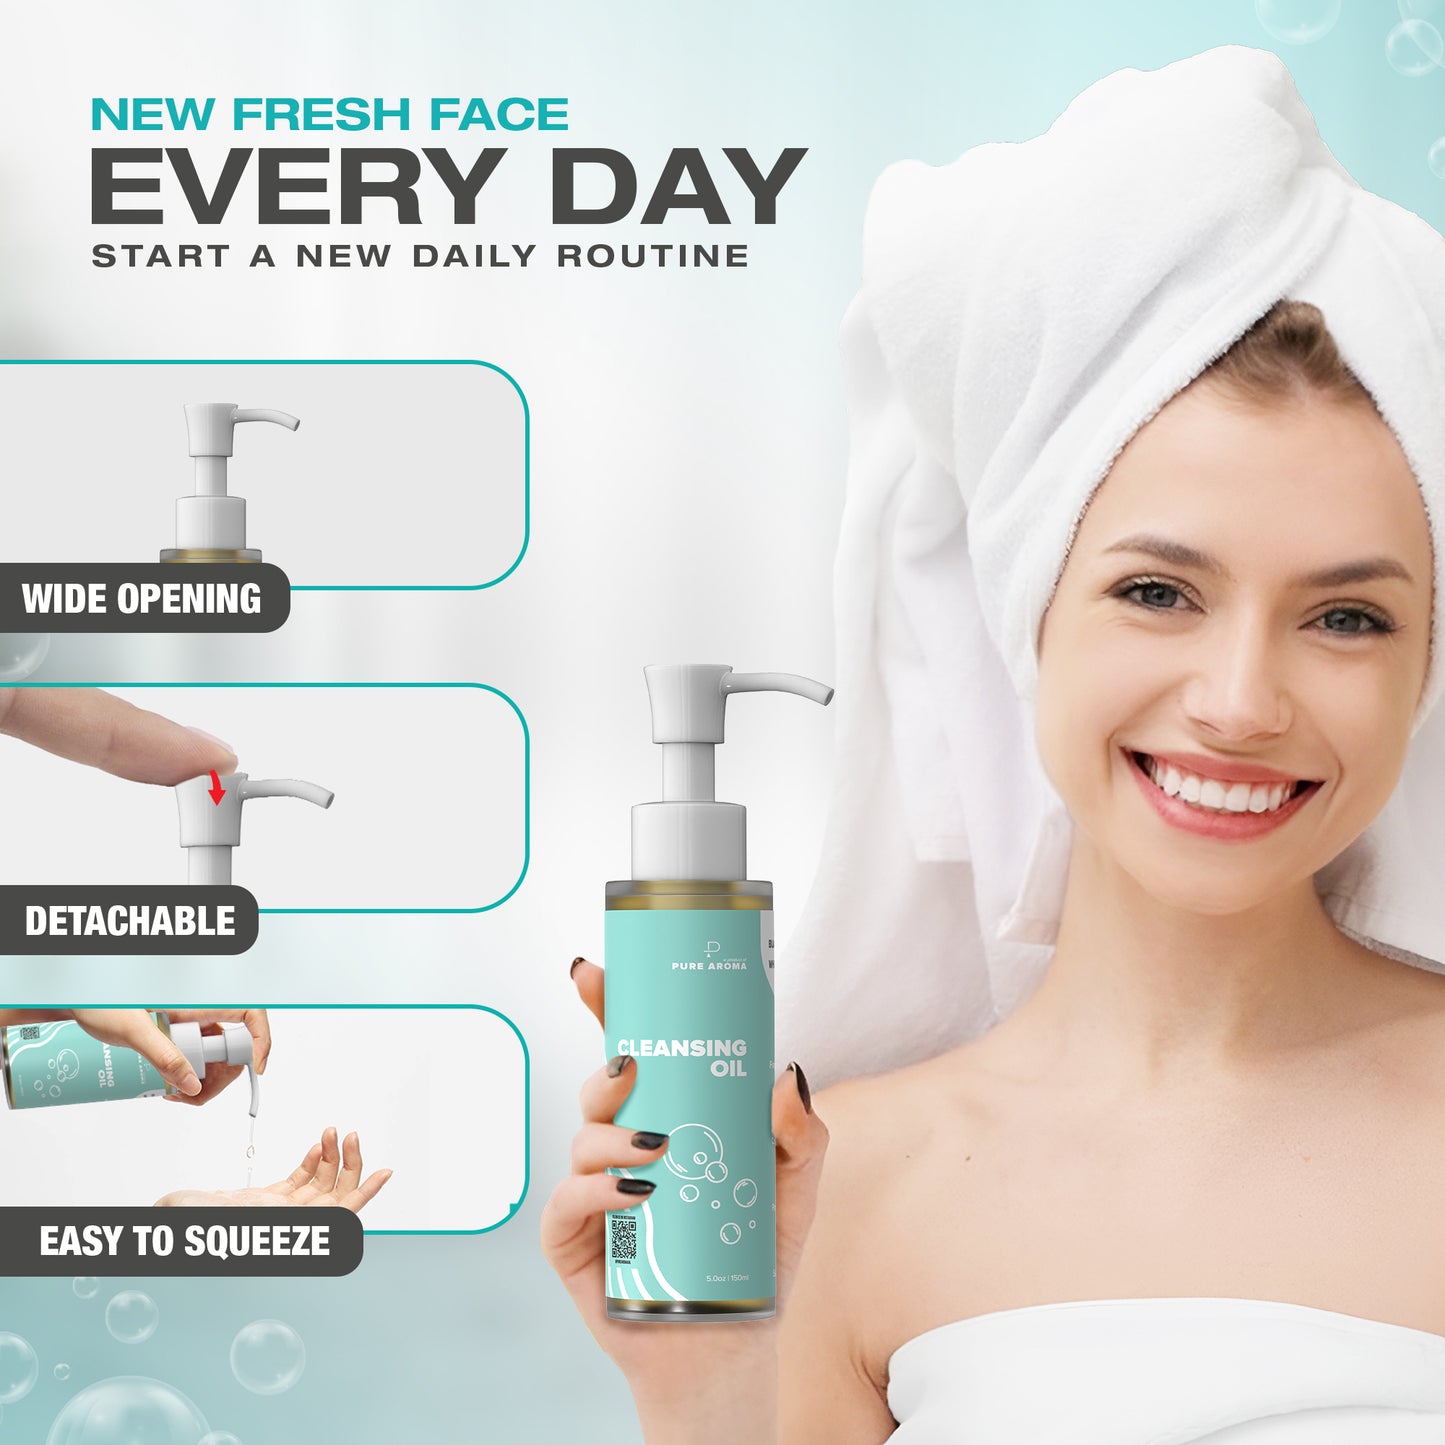 Cleansing Oil | Facial Cleanser, Daily Makeup Blackheads Removal | Fragrance-Free, Paraben-Free, Sulfate-Free, Colorant Free